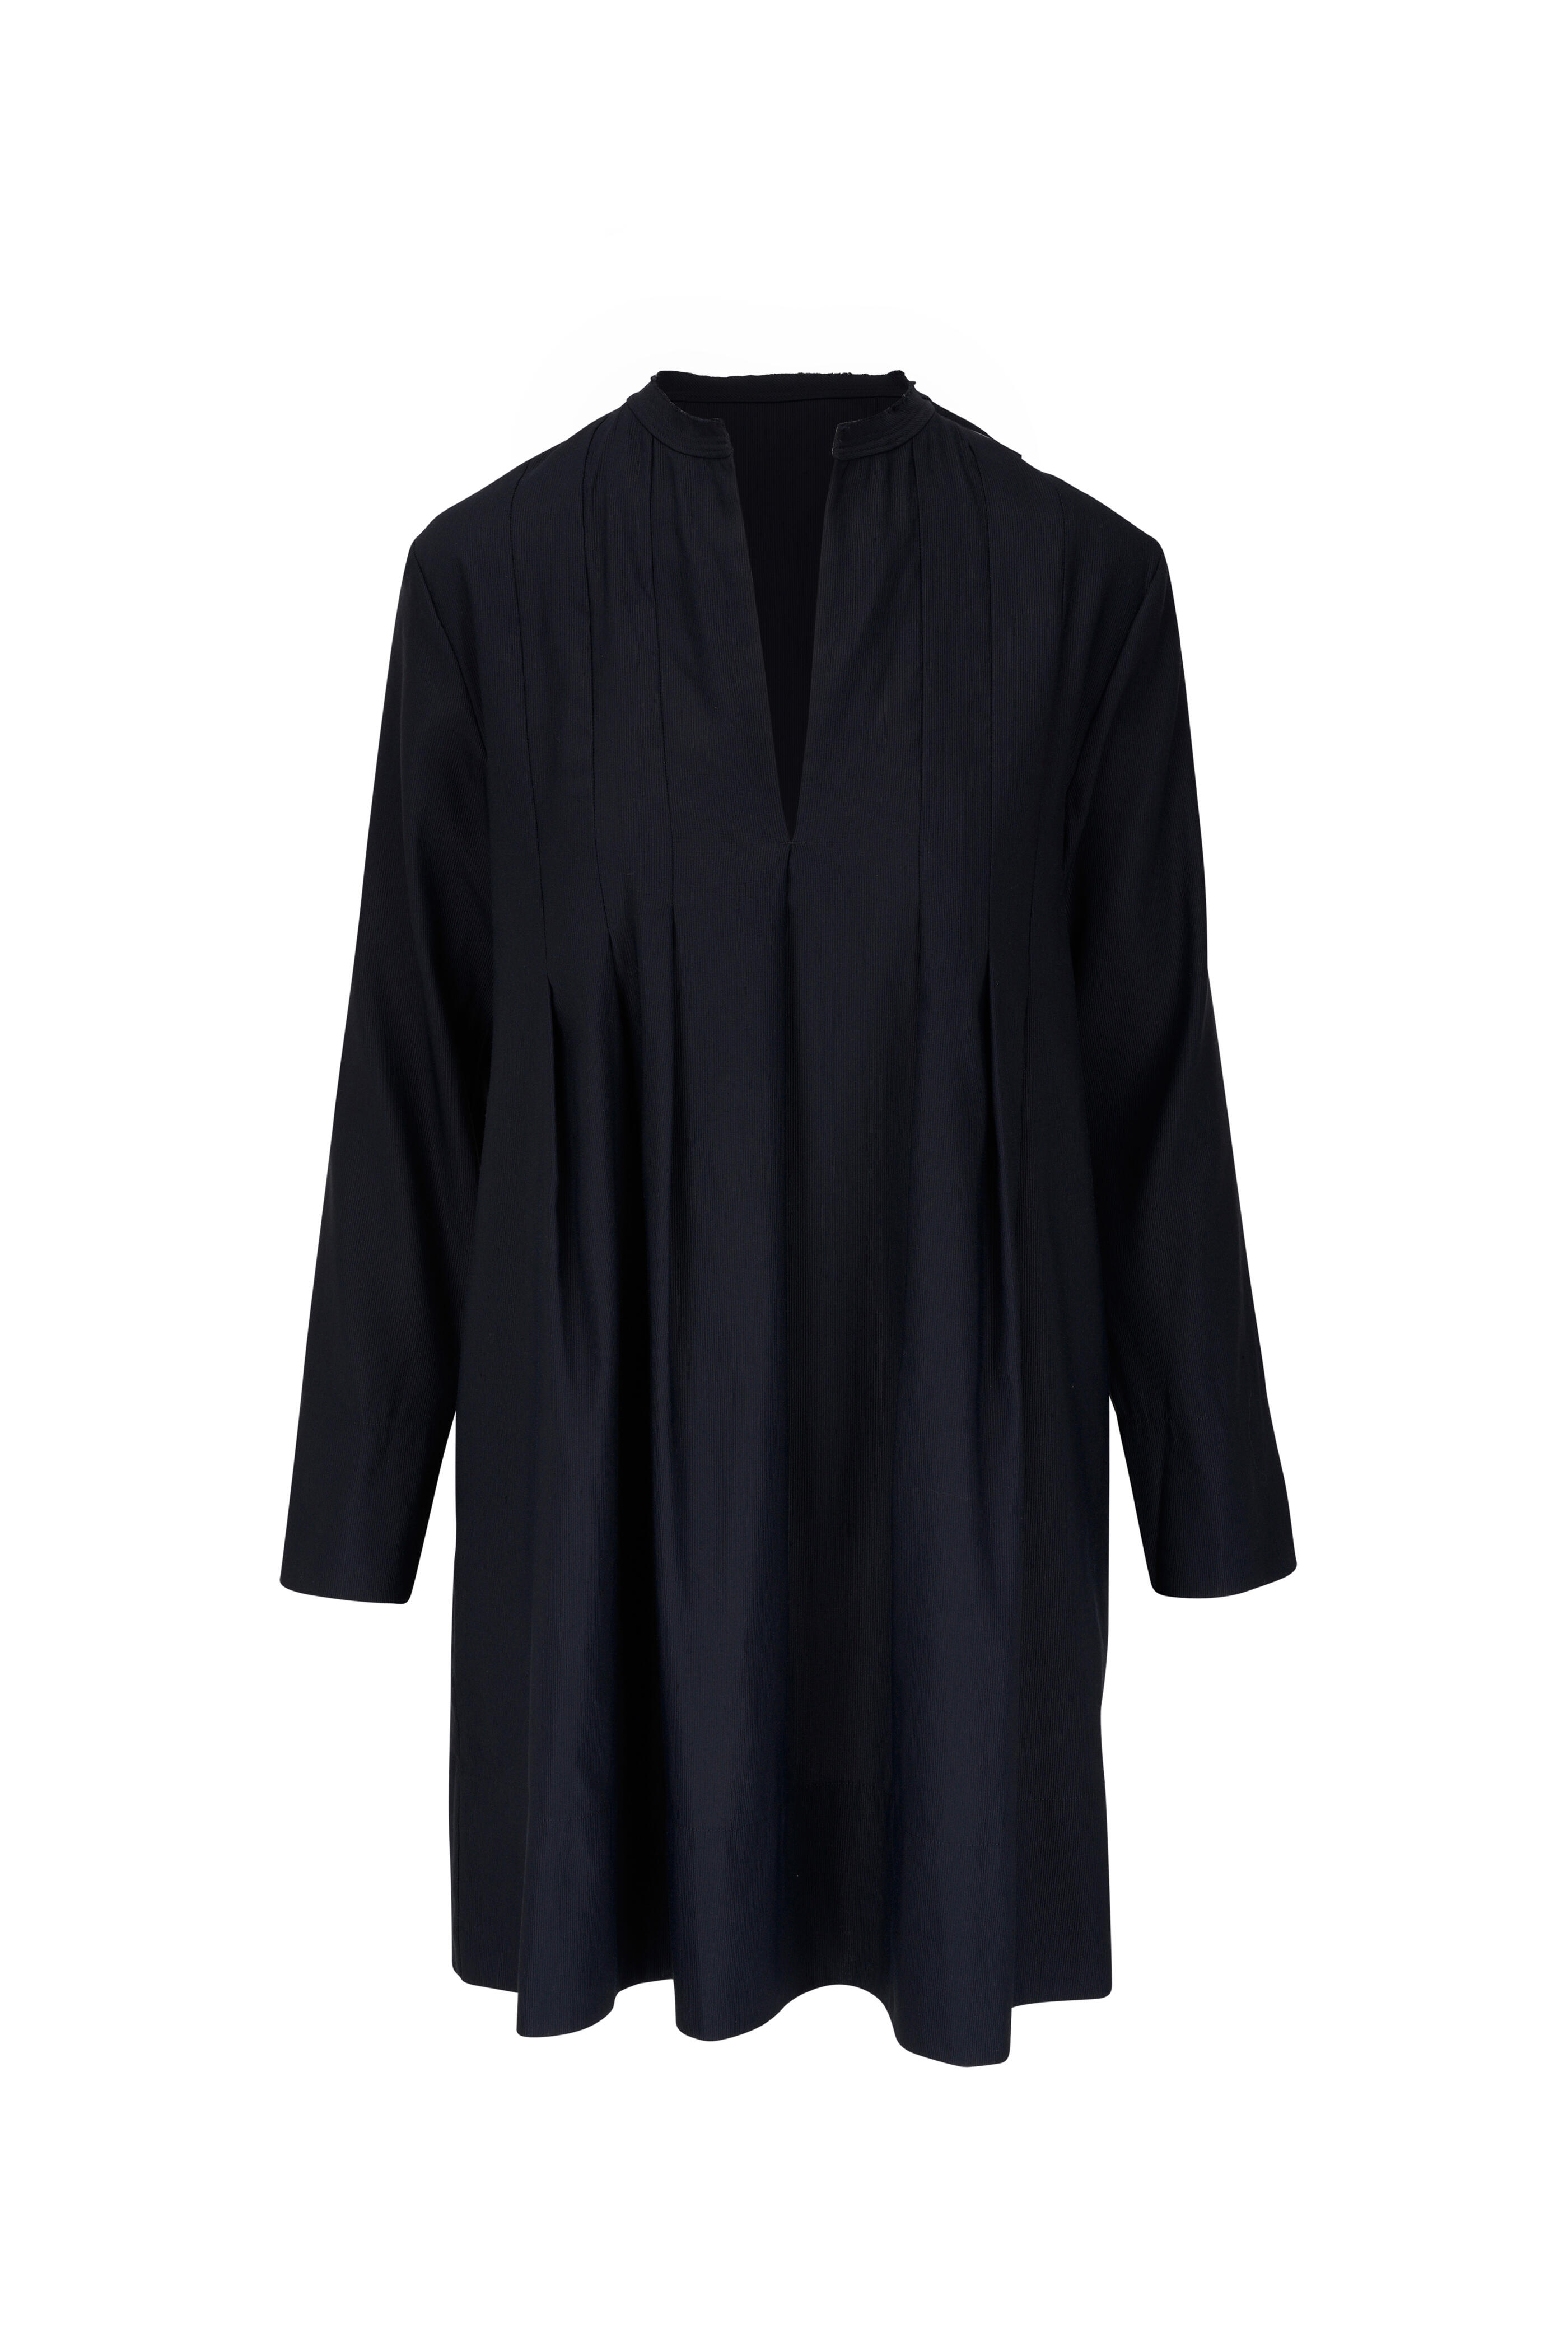 Vince - Black Trapeze Pleated Long Sleeve Dress | Mitchell Stores